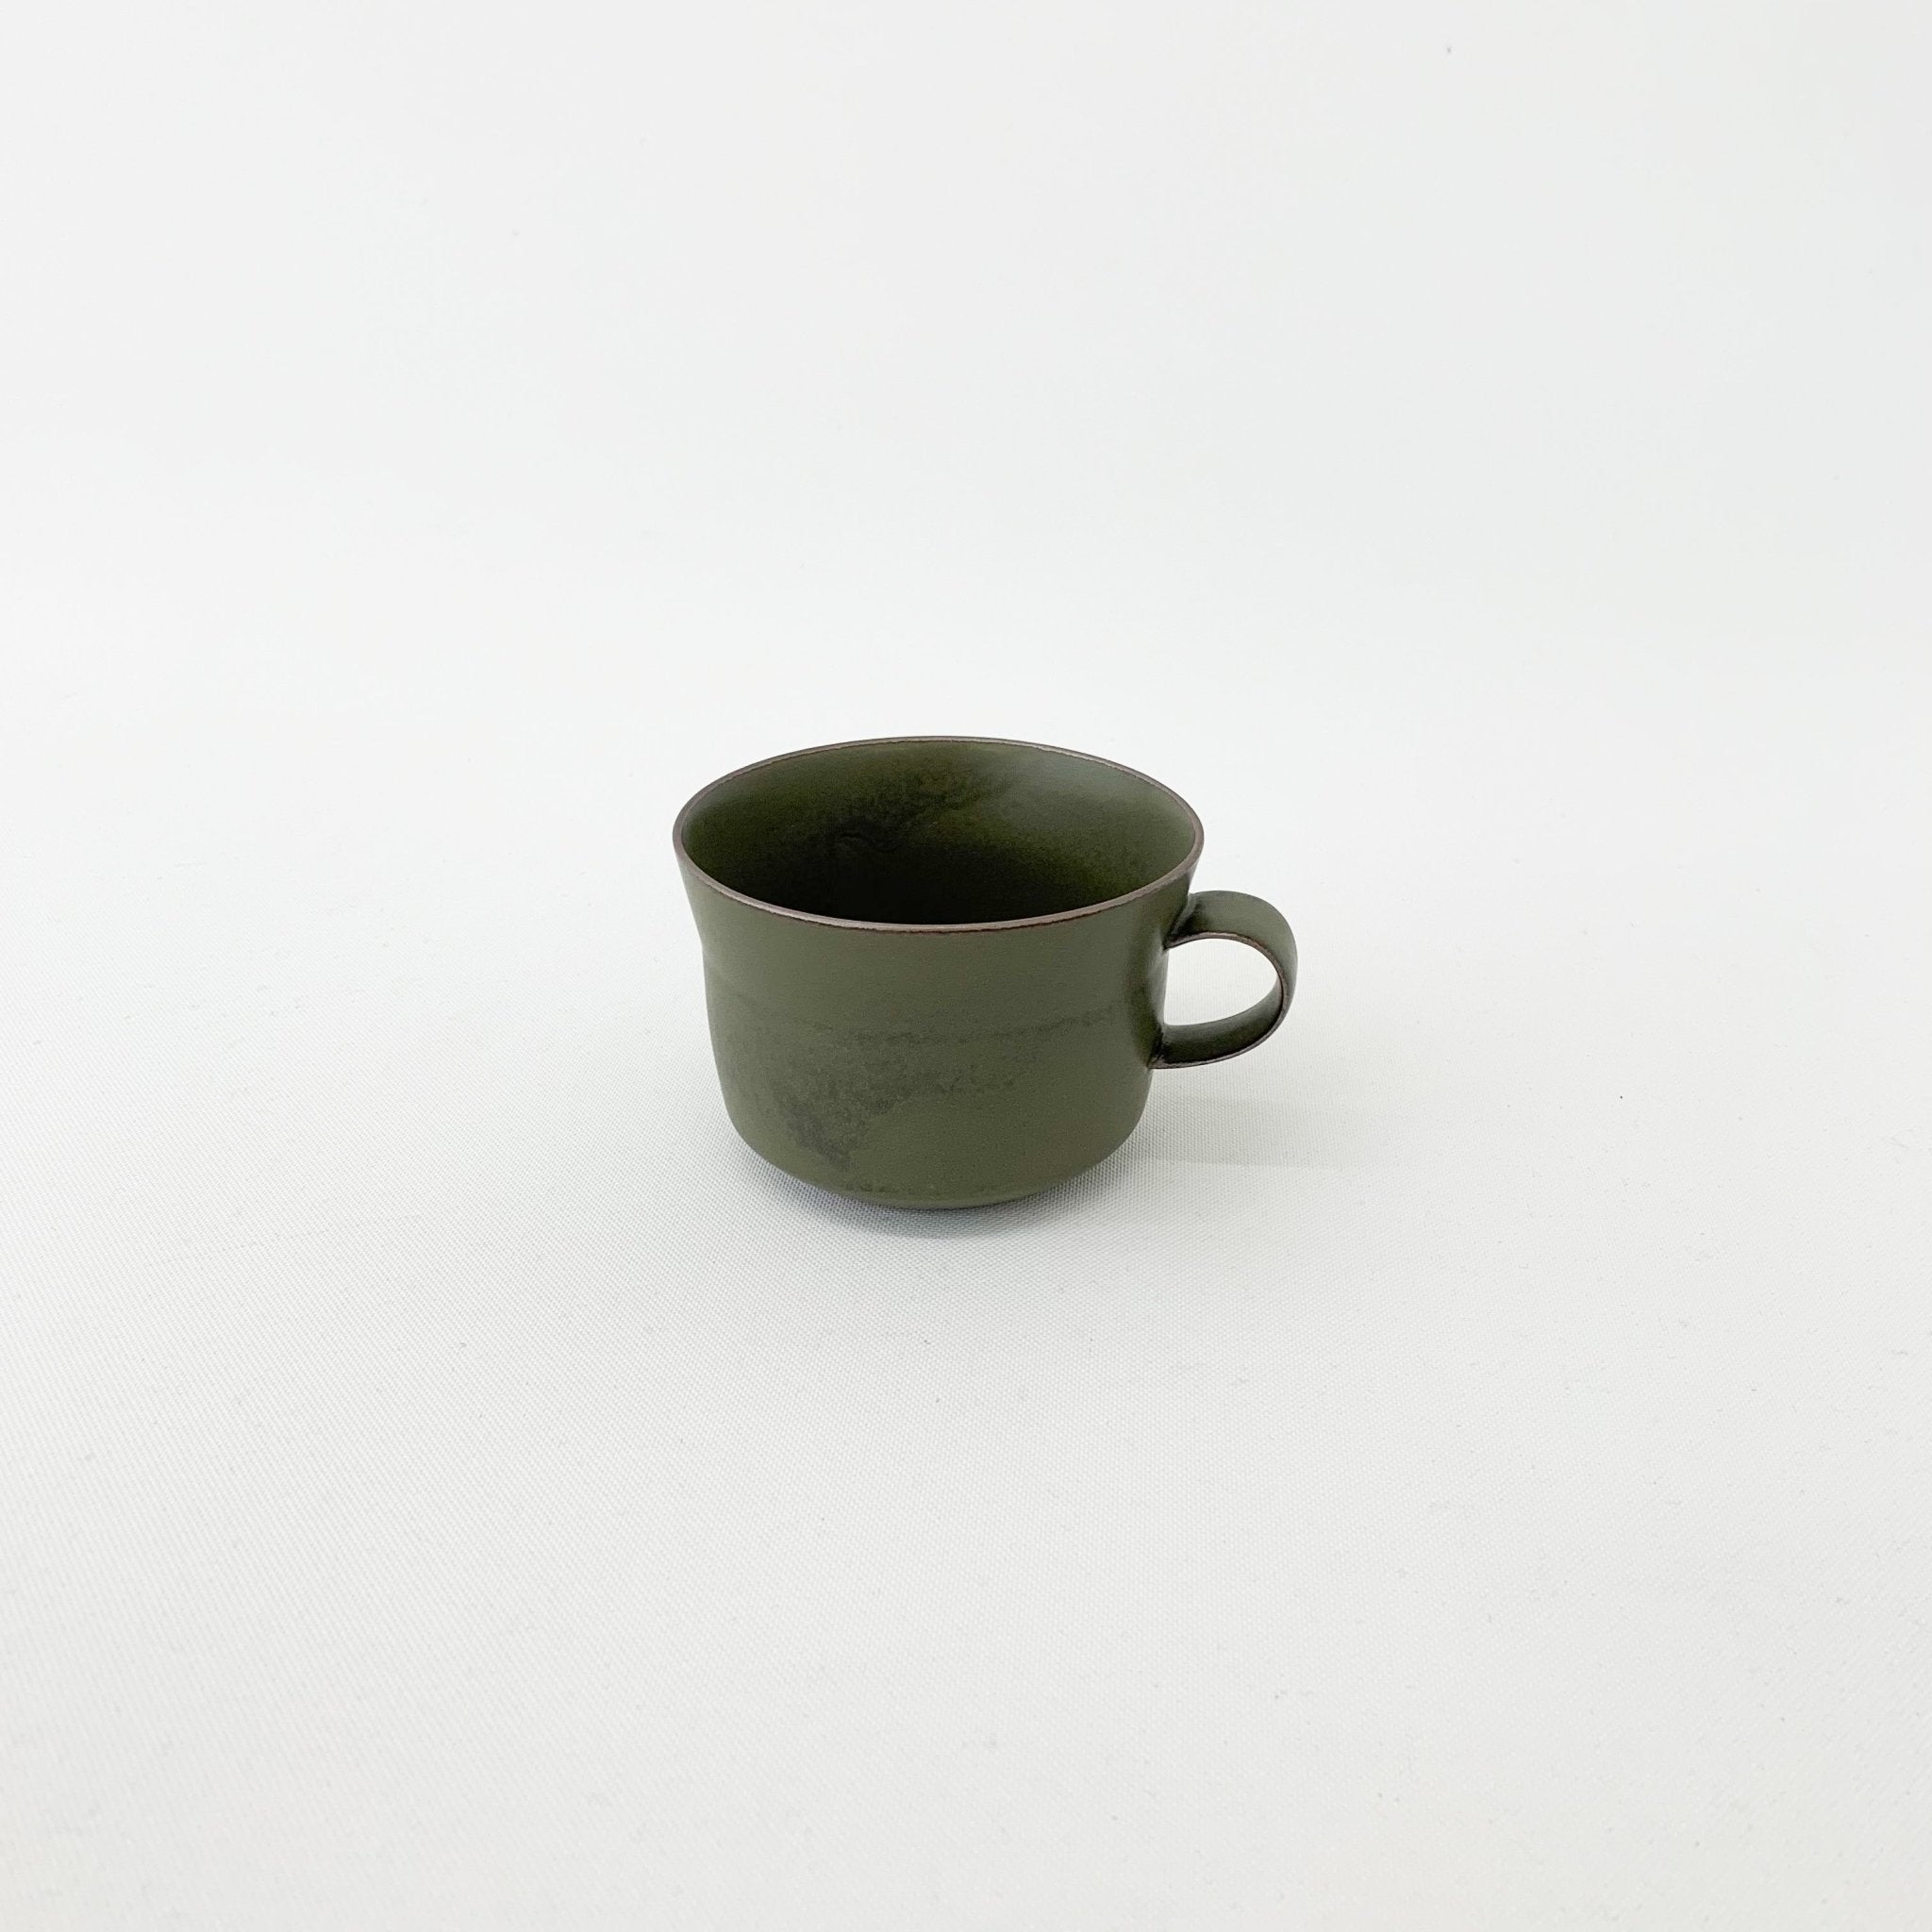 Oxymoron Plate and Cup by Yumiko Iihoshi - tortoise general store